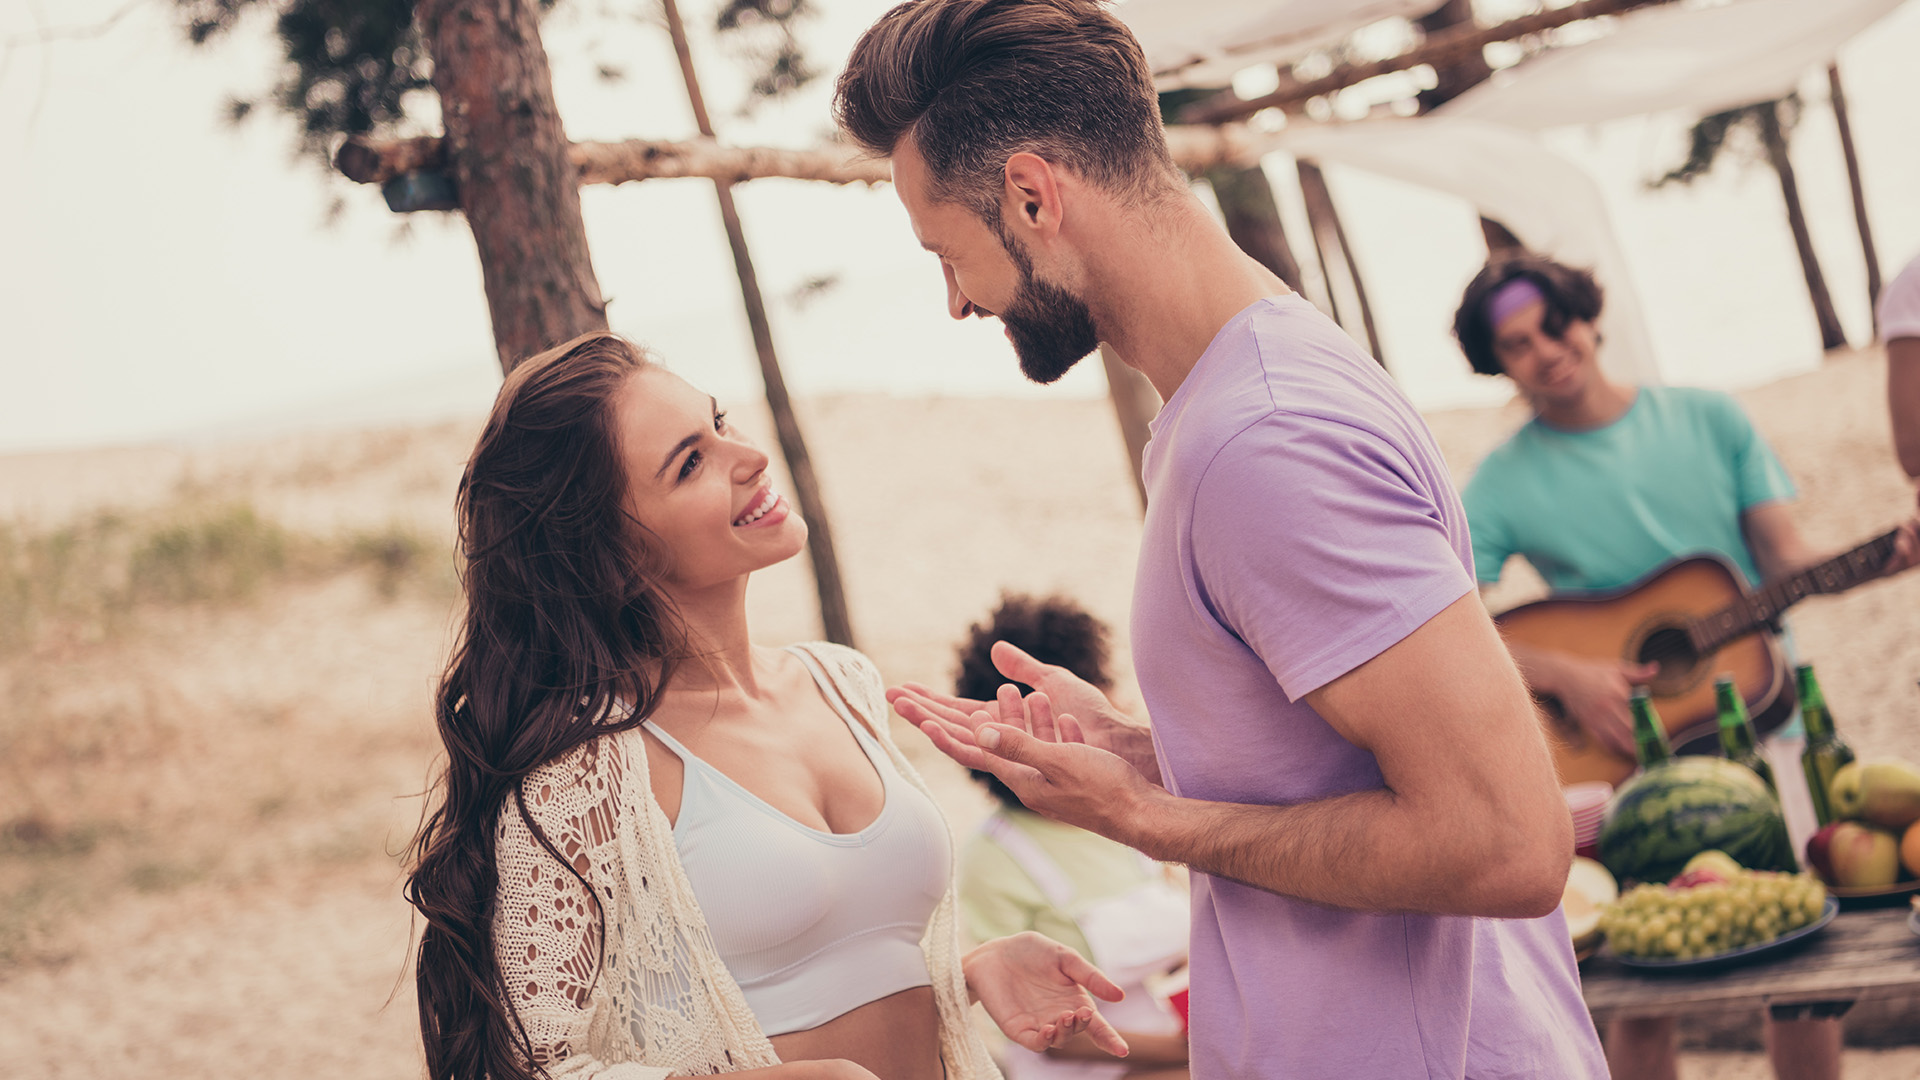 Brunette man in pink shirt and woman in white bustier smiling at each other while talking. Beach in the background.